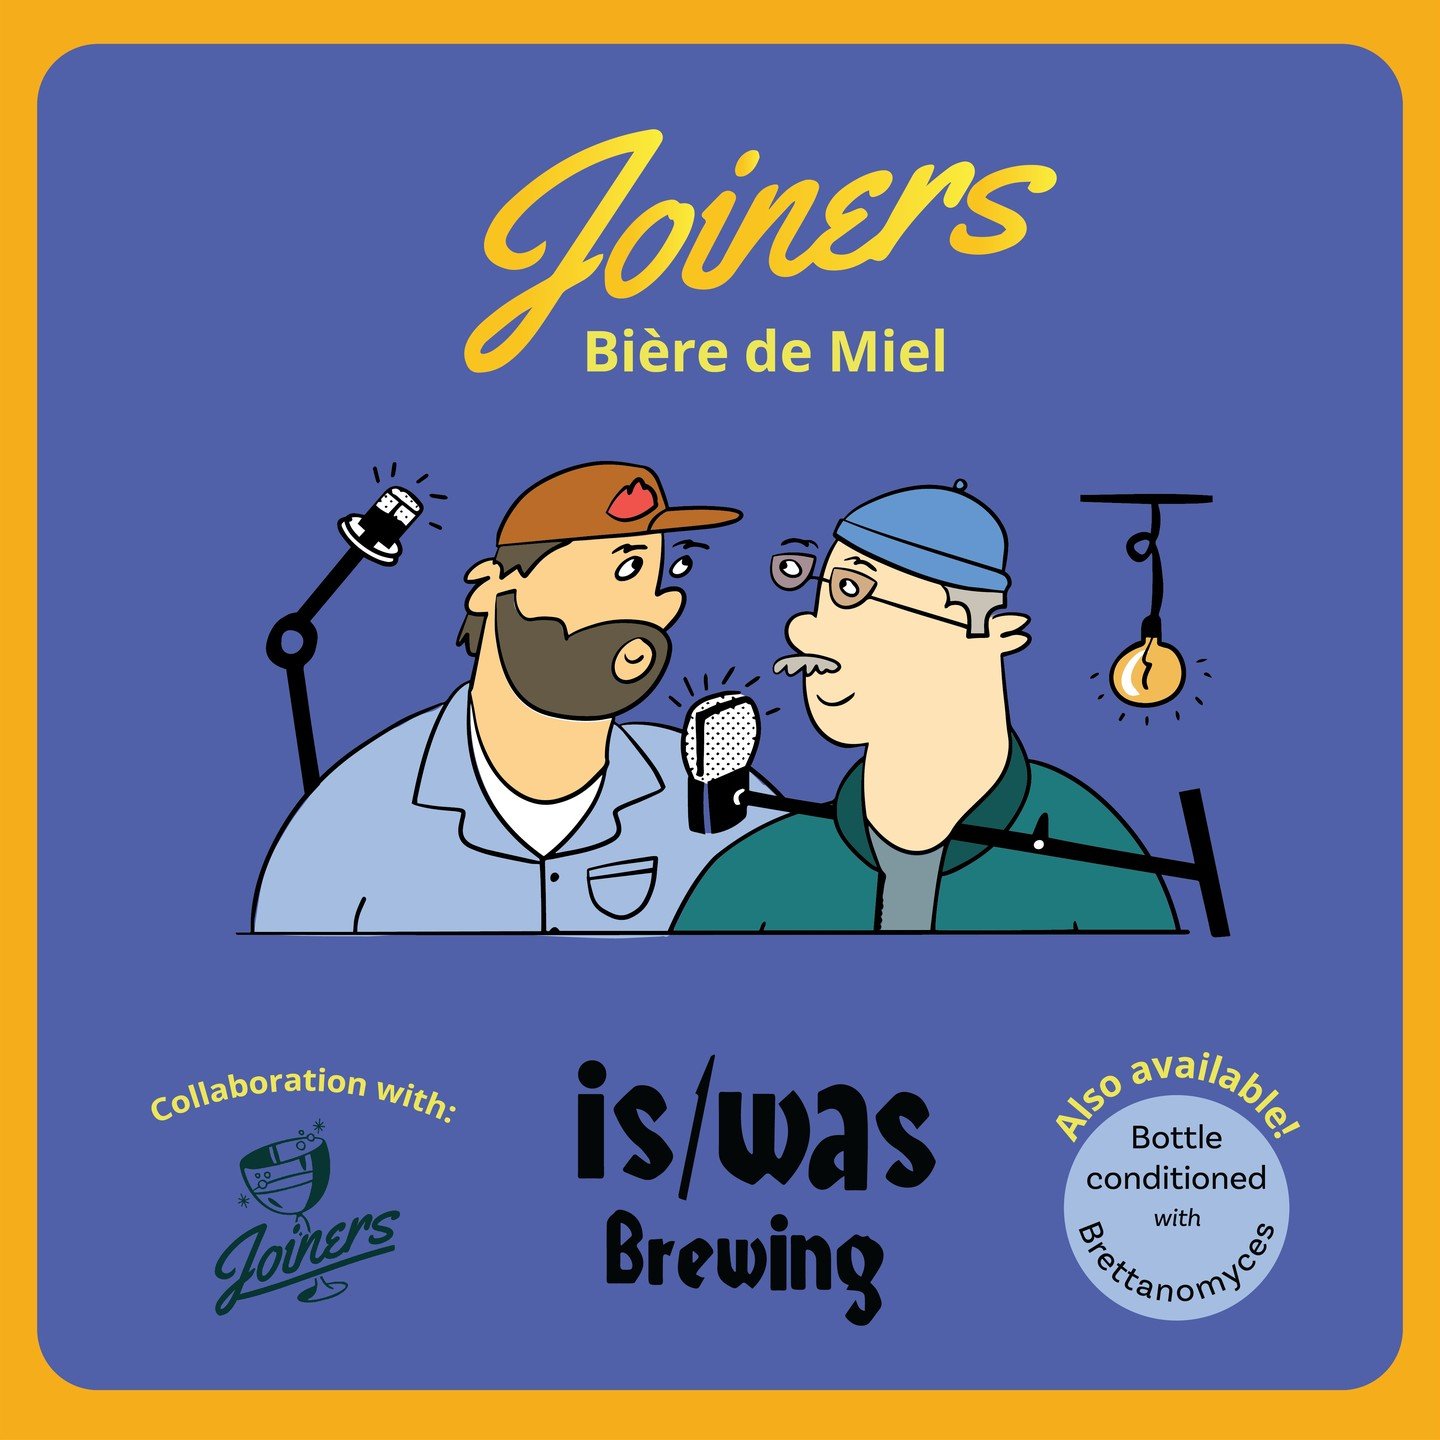 Follow our story to see where Joiners, our Biere de Miel Collab with @joinerspod gets distributed!